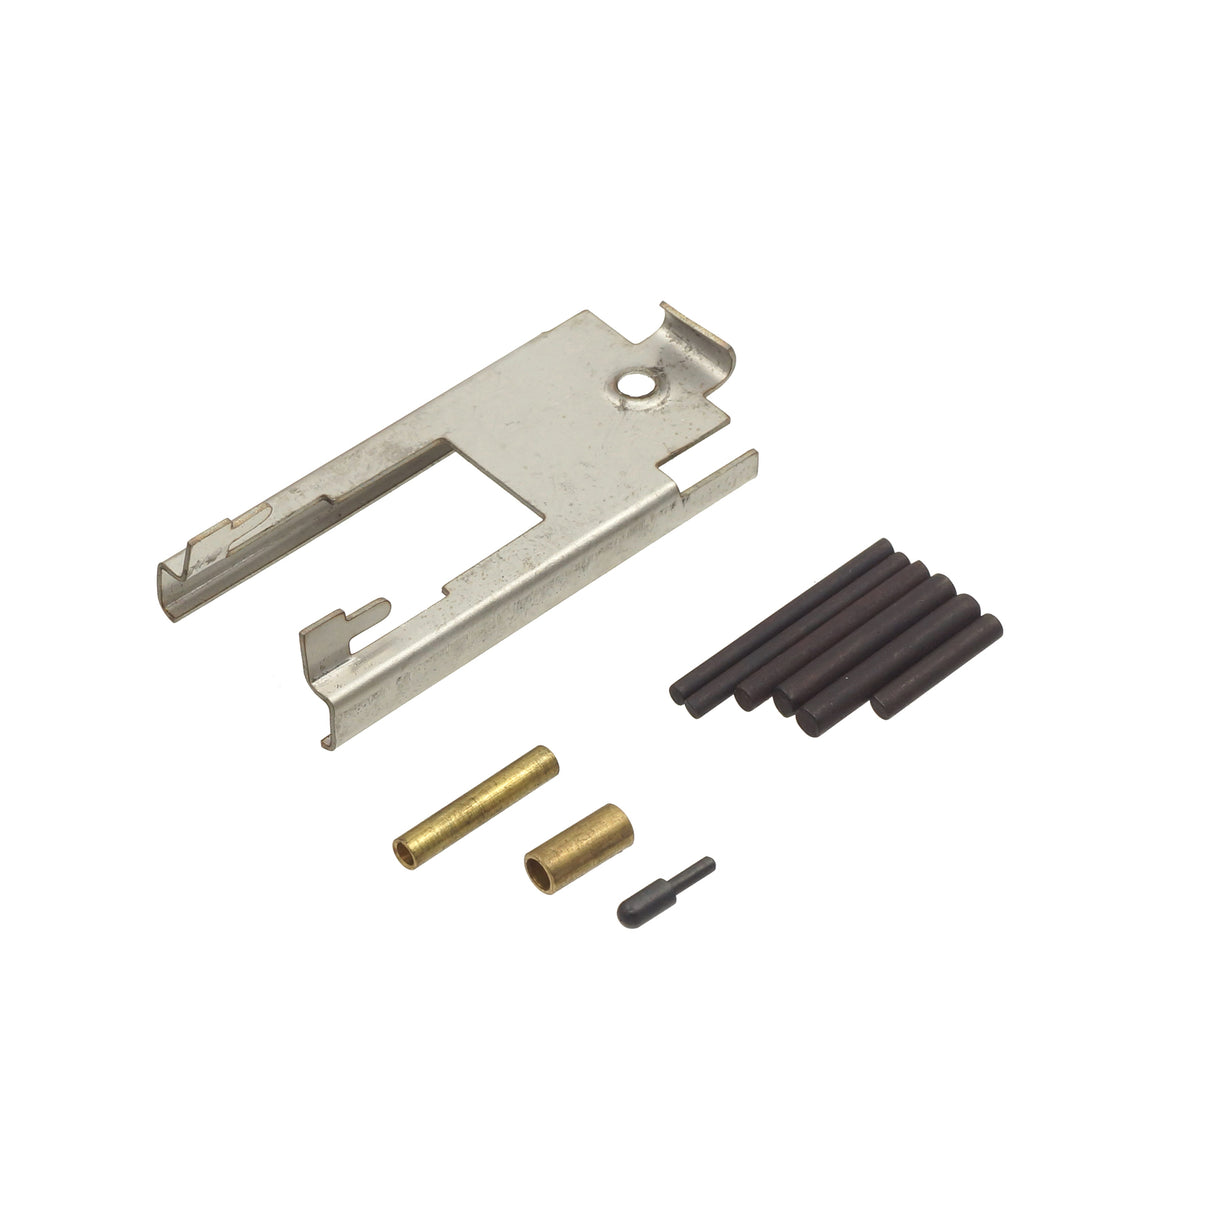 Double Bell Original Replacement Pin Set for 736 M9 GBB ( M9-CY )